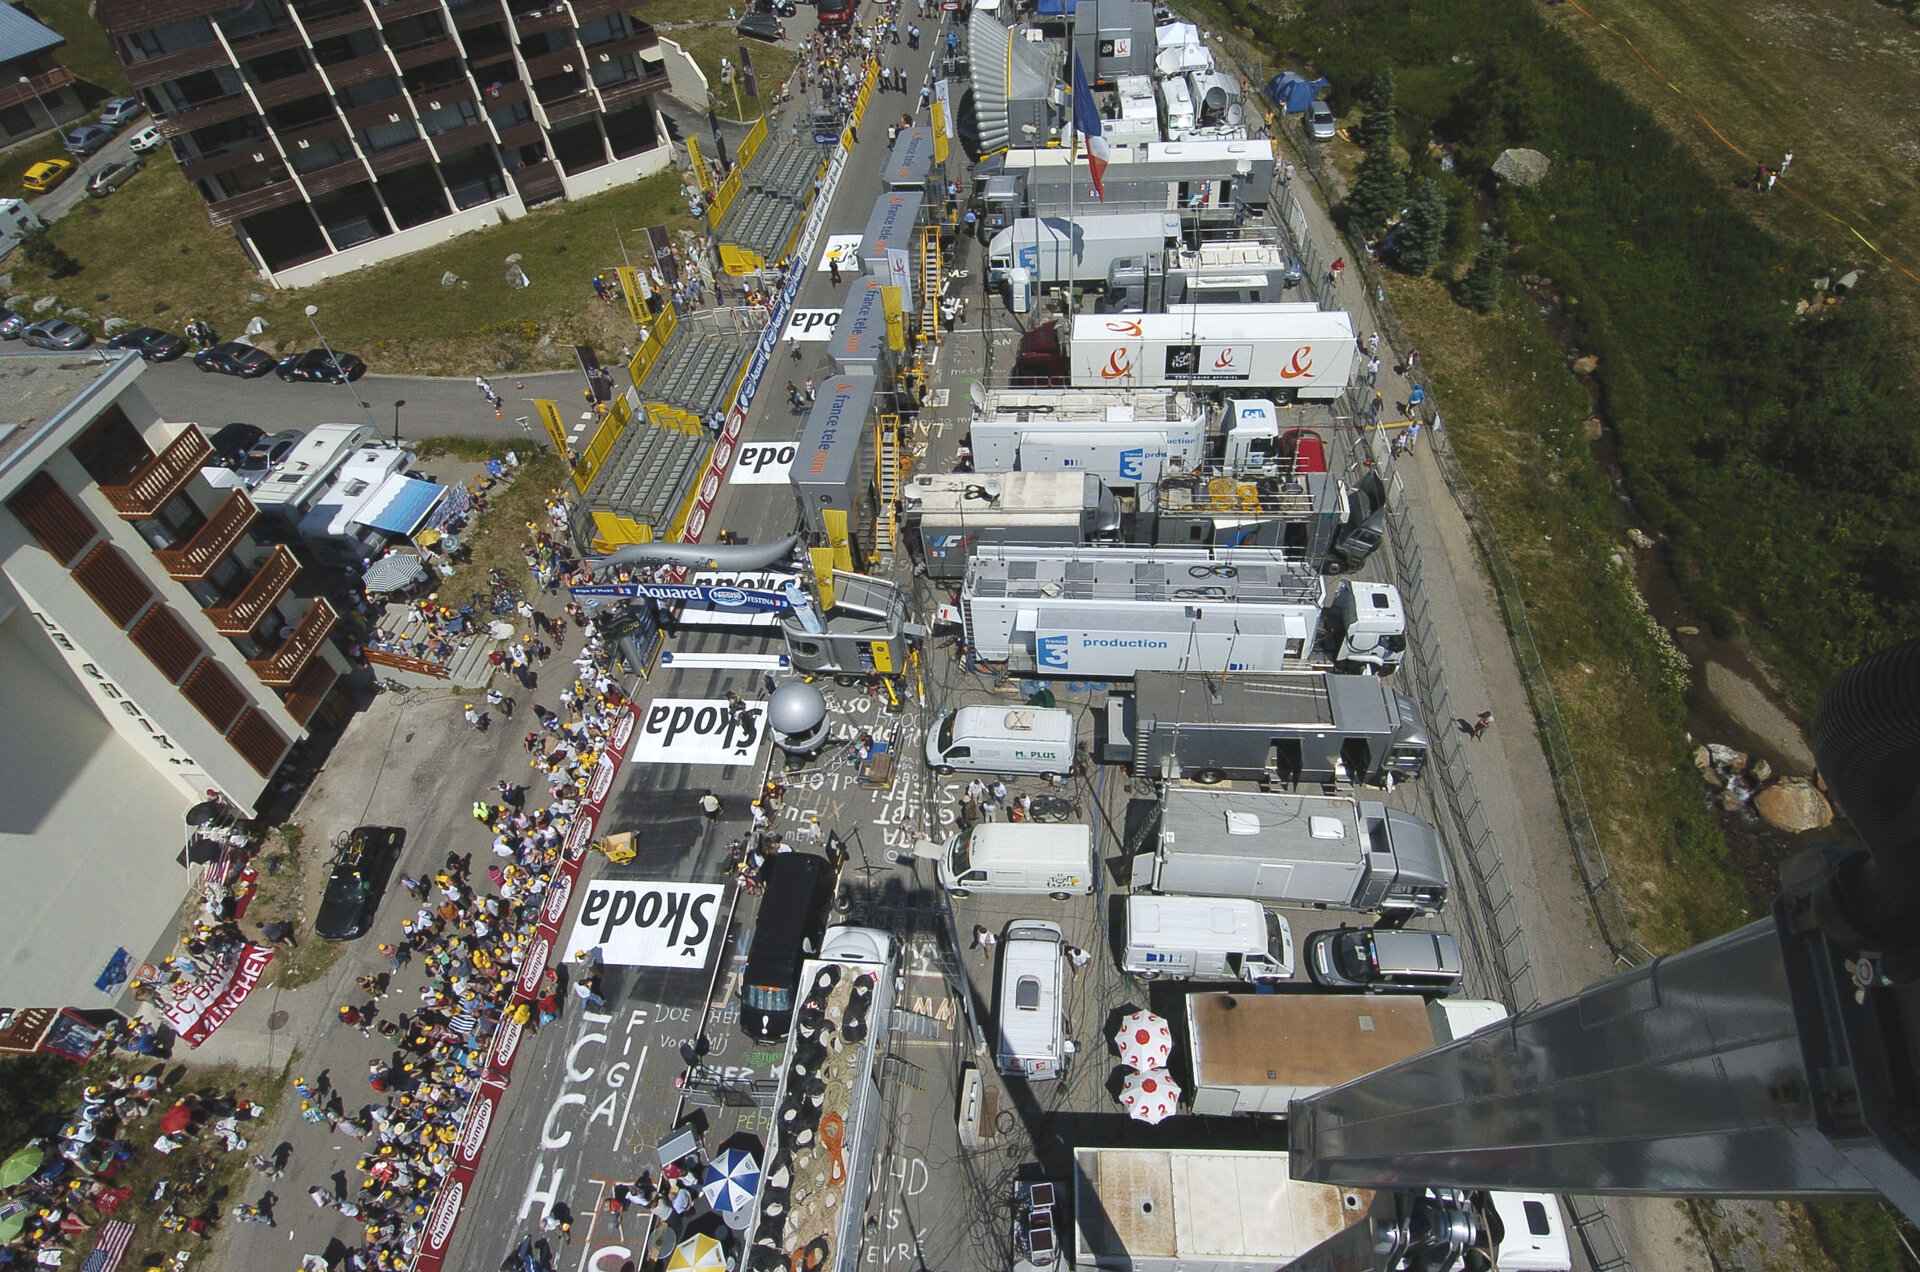 The technical zone of Tour de france at the arrival in Alpe d'Huez